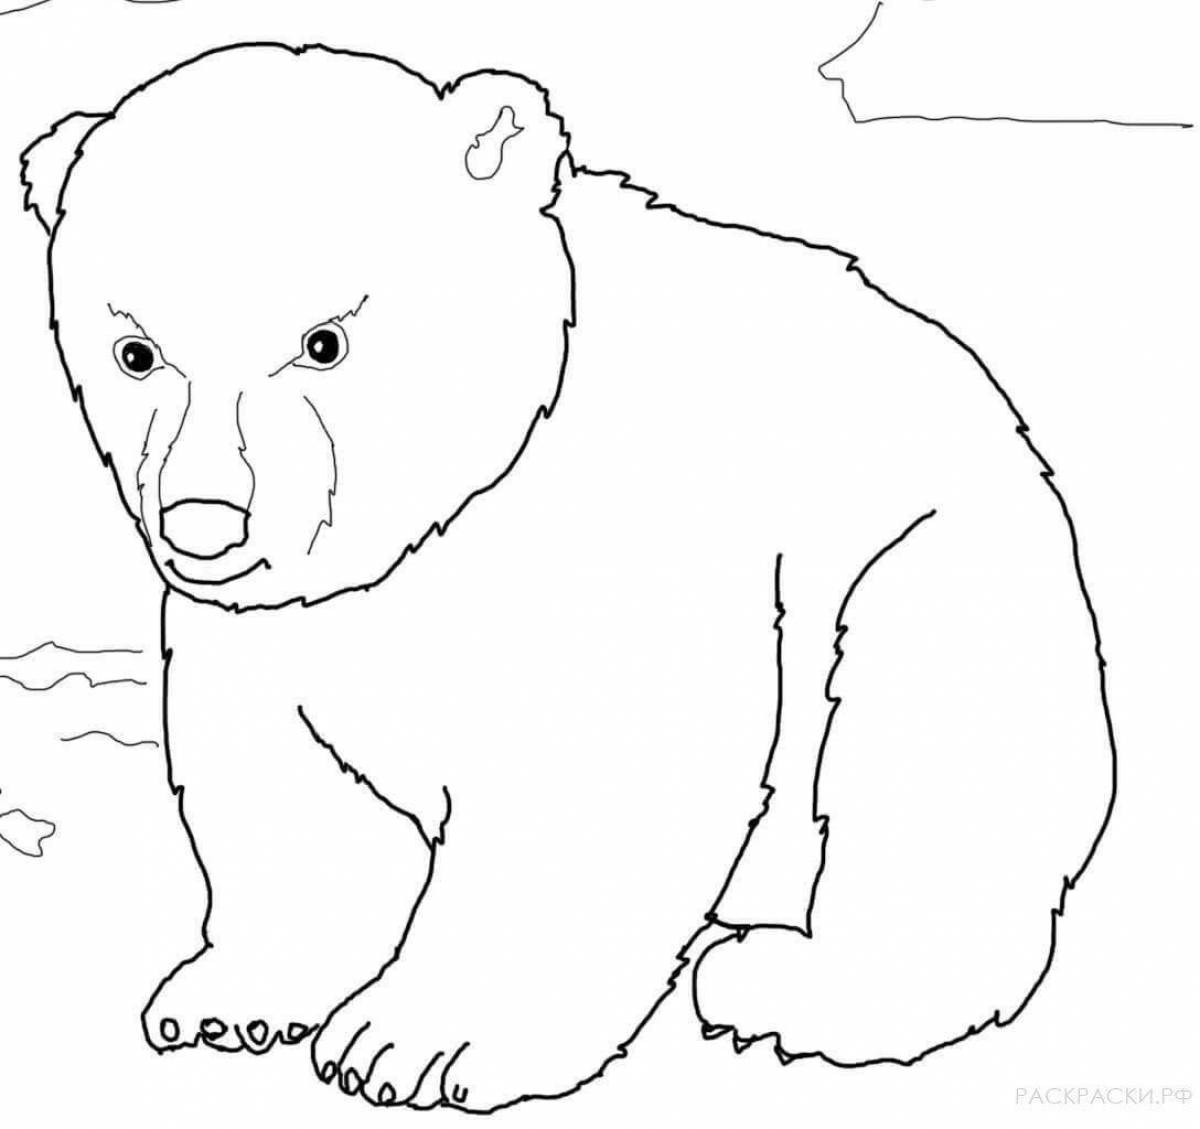 Creative polar bear coloring book for kids 6-7 years old